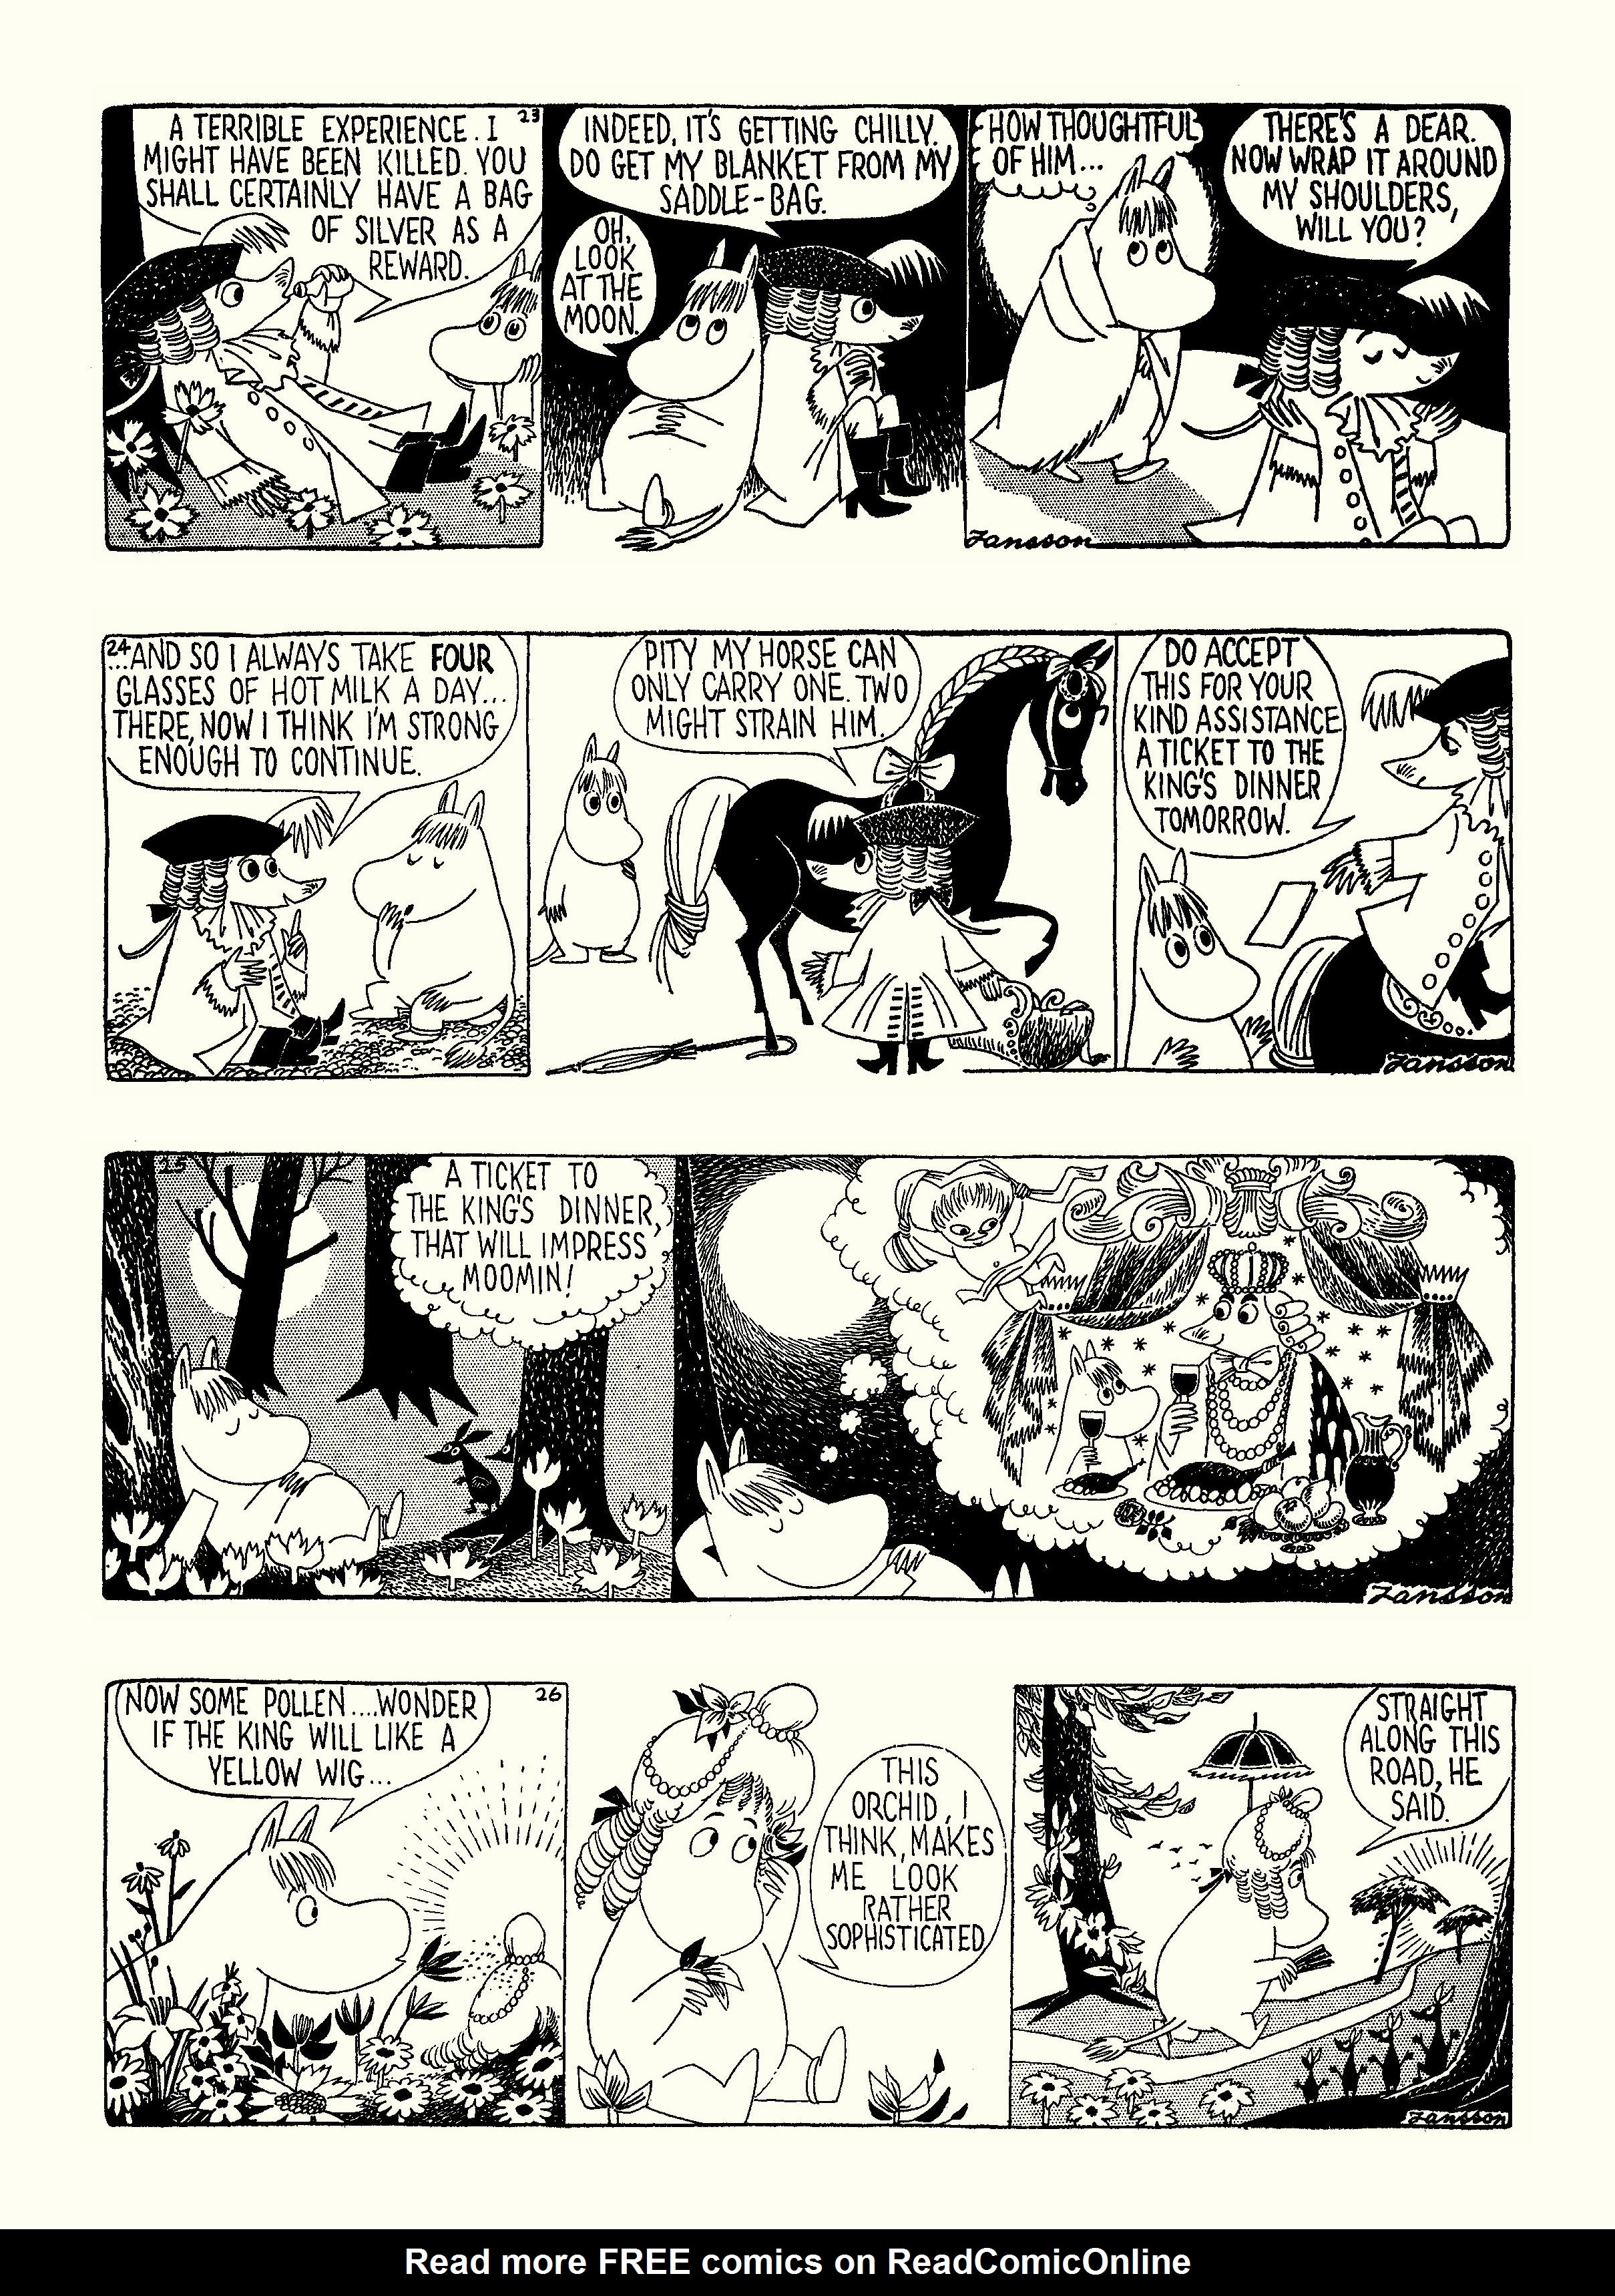 Read online Moomin: The Complete Tove Jansson Comic Strip comic -  Issue # TPB 4 - 29